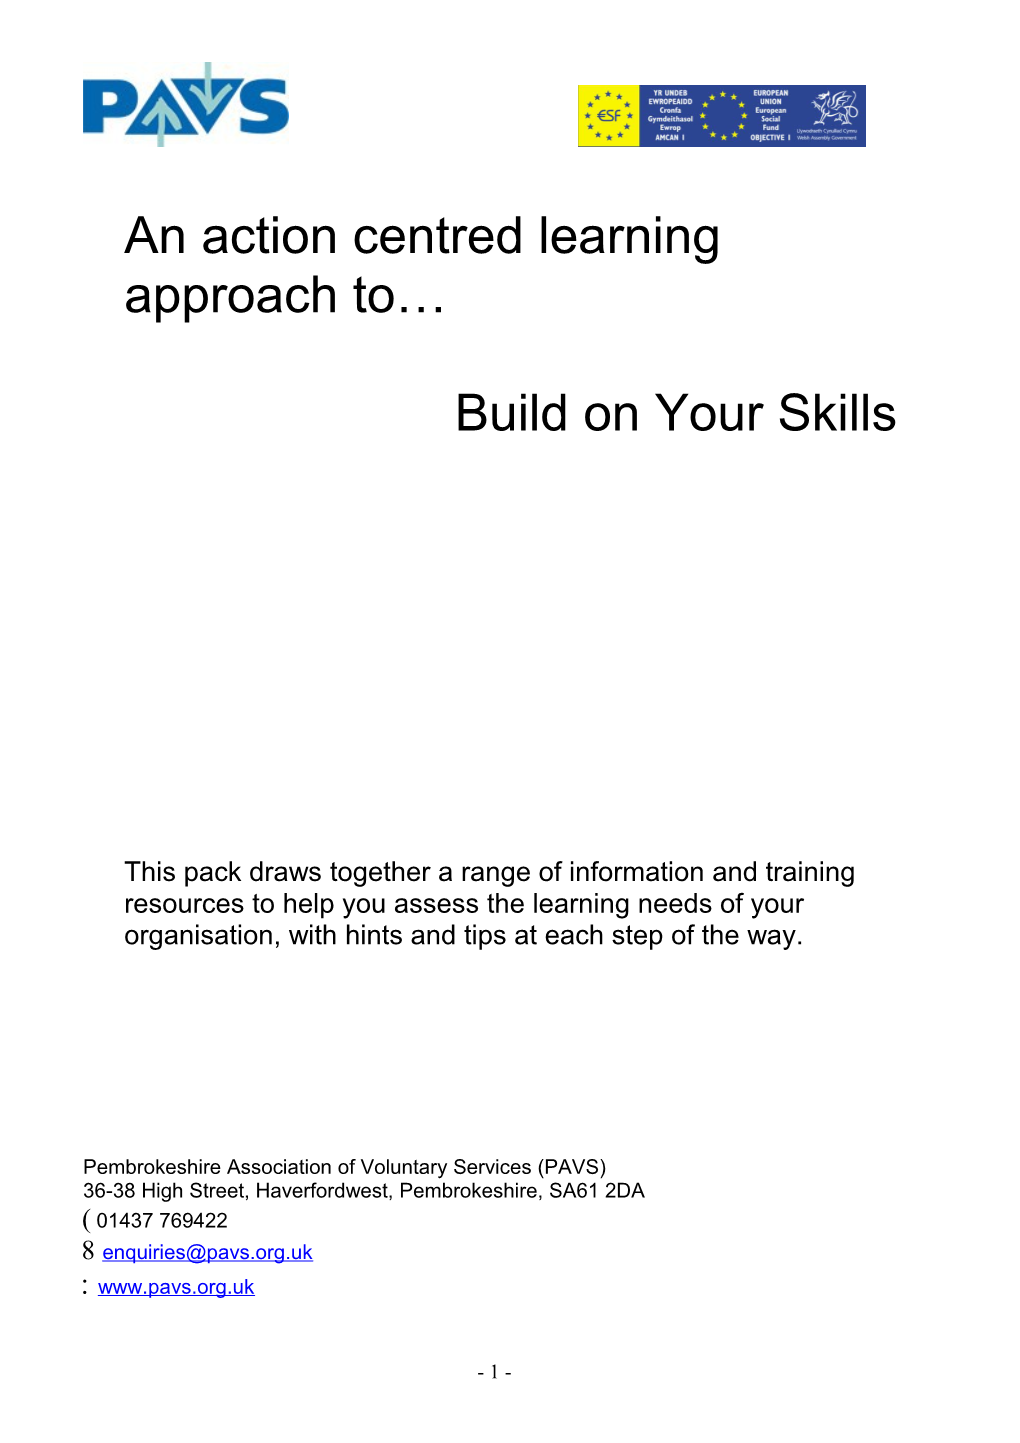 An Action Centred Learning Approach To